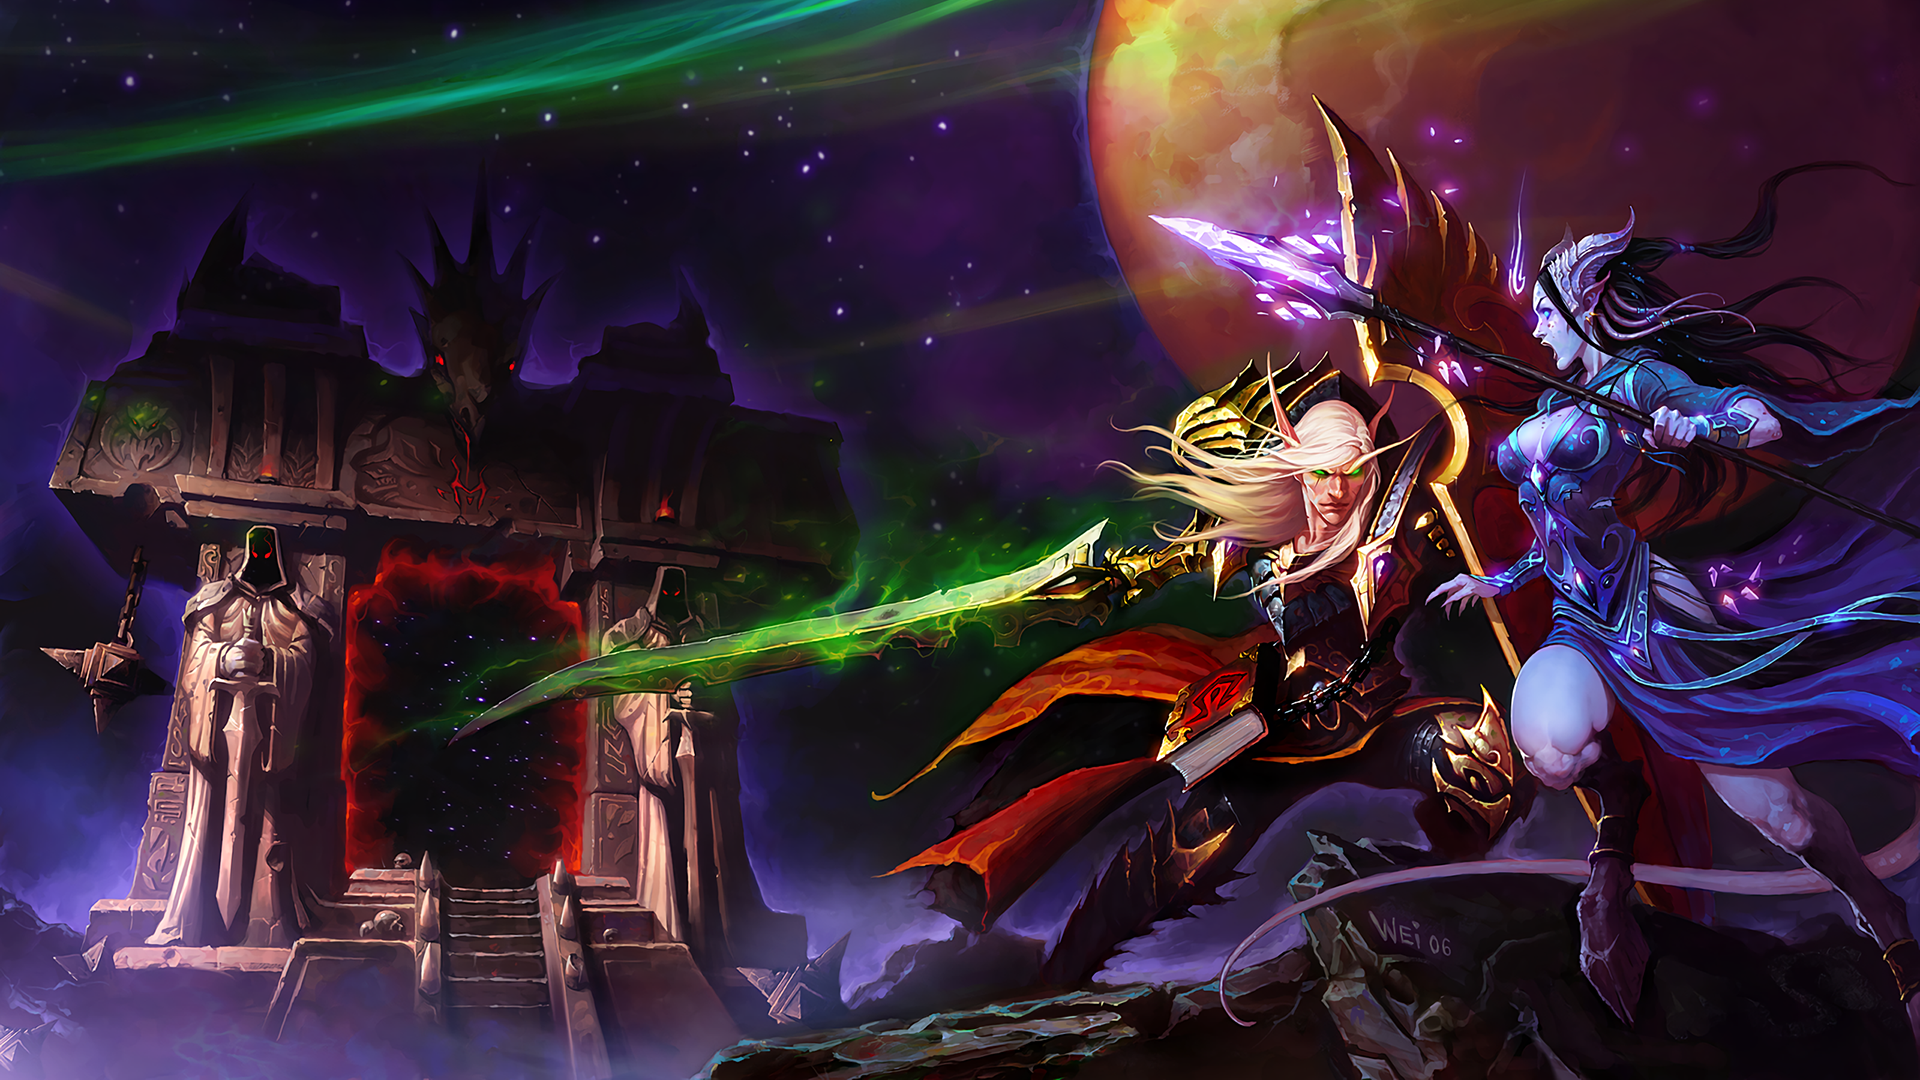 blood elf wallpaper,action adventure game,pc game,cg artwork,games,fictional character